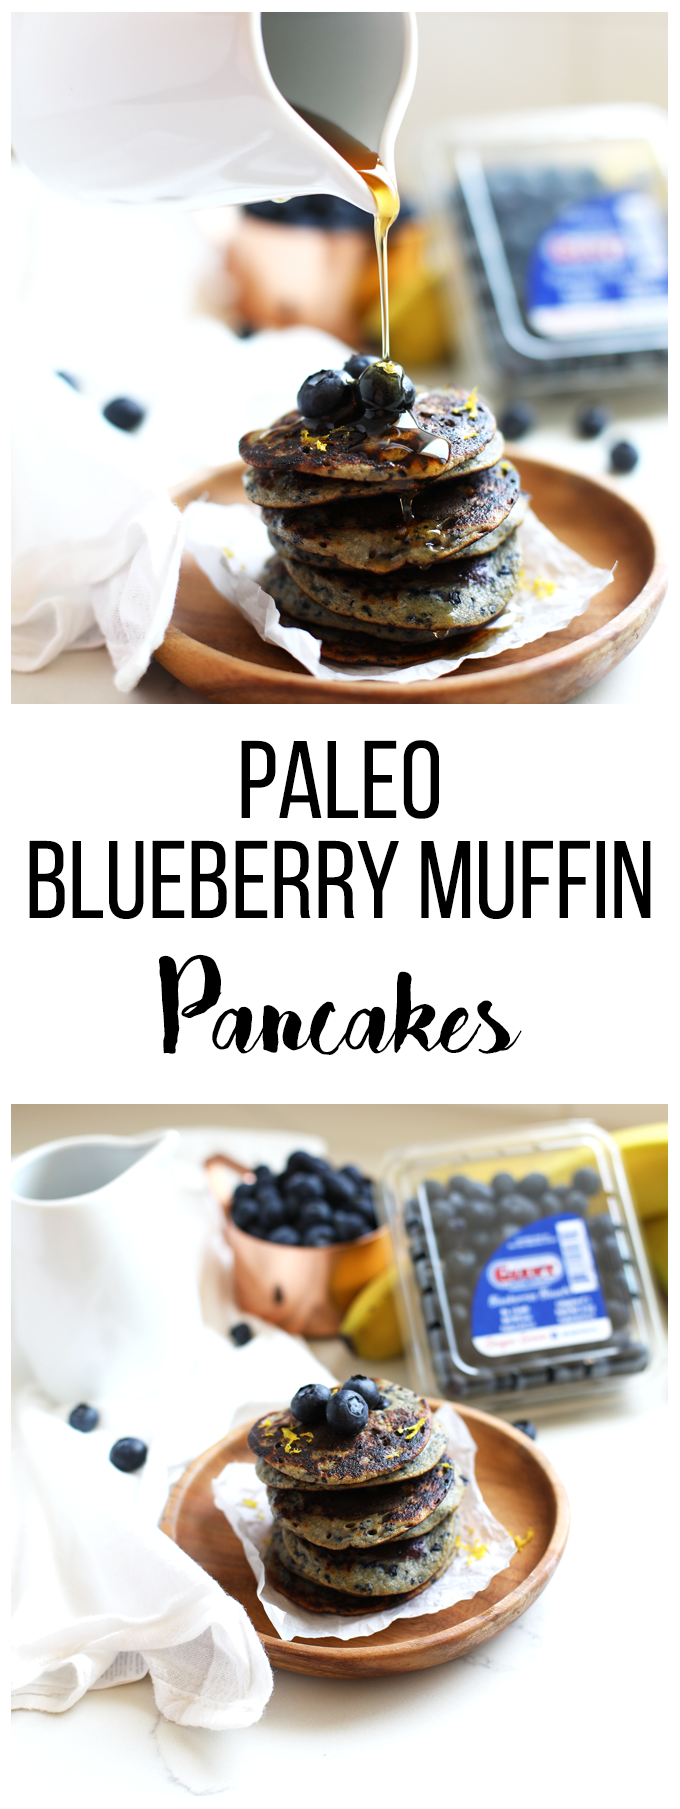 These Paleo Blueberry Muffin Pancakes only have a few ingredients and are a great grain free breakfast option for anyone!